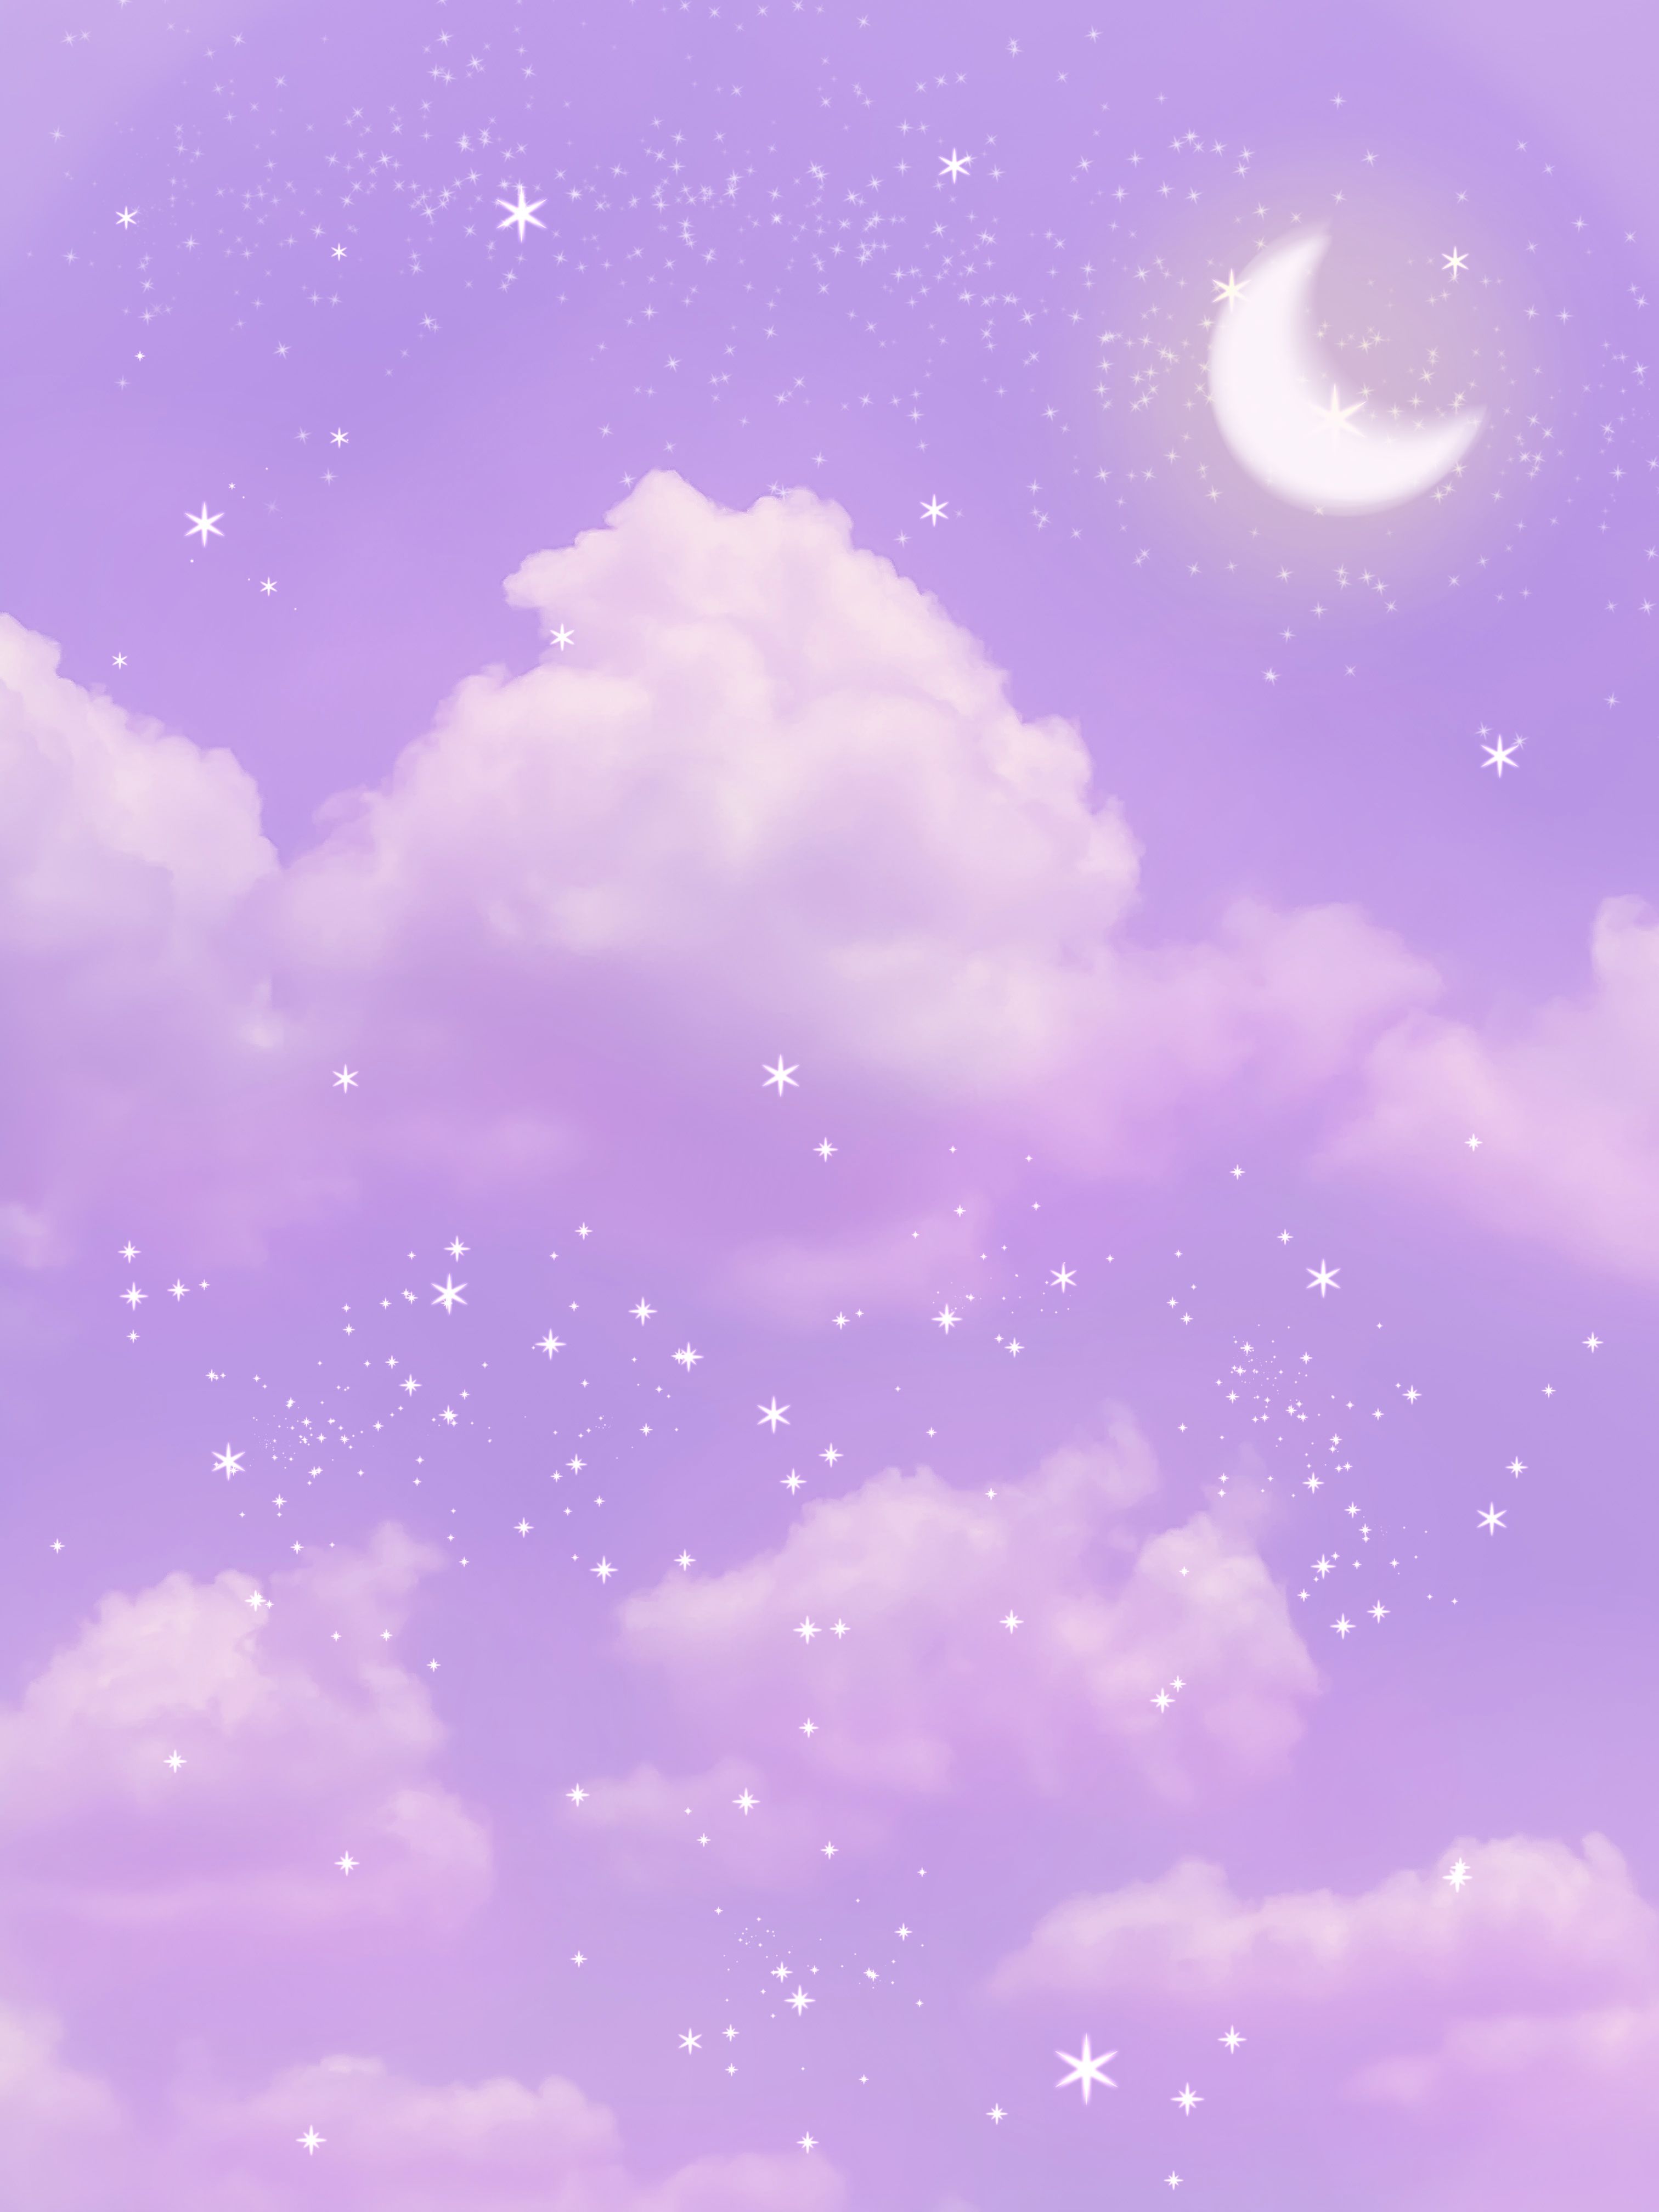 A purple sky with clouds and stars - Pastel, purple, light purple, sky, violet, cute purple, pastel purple